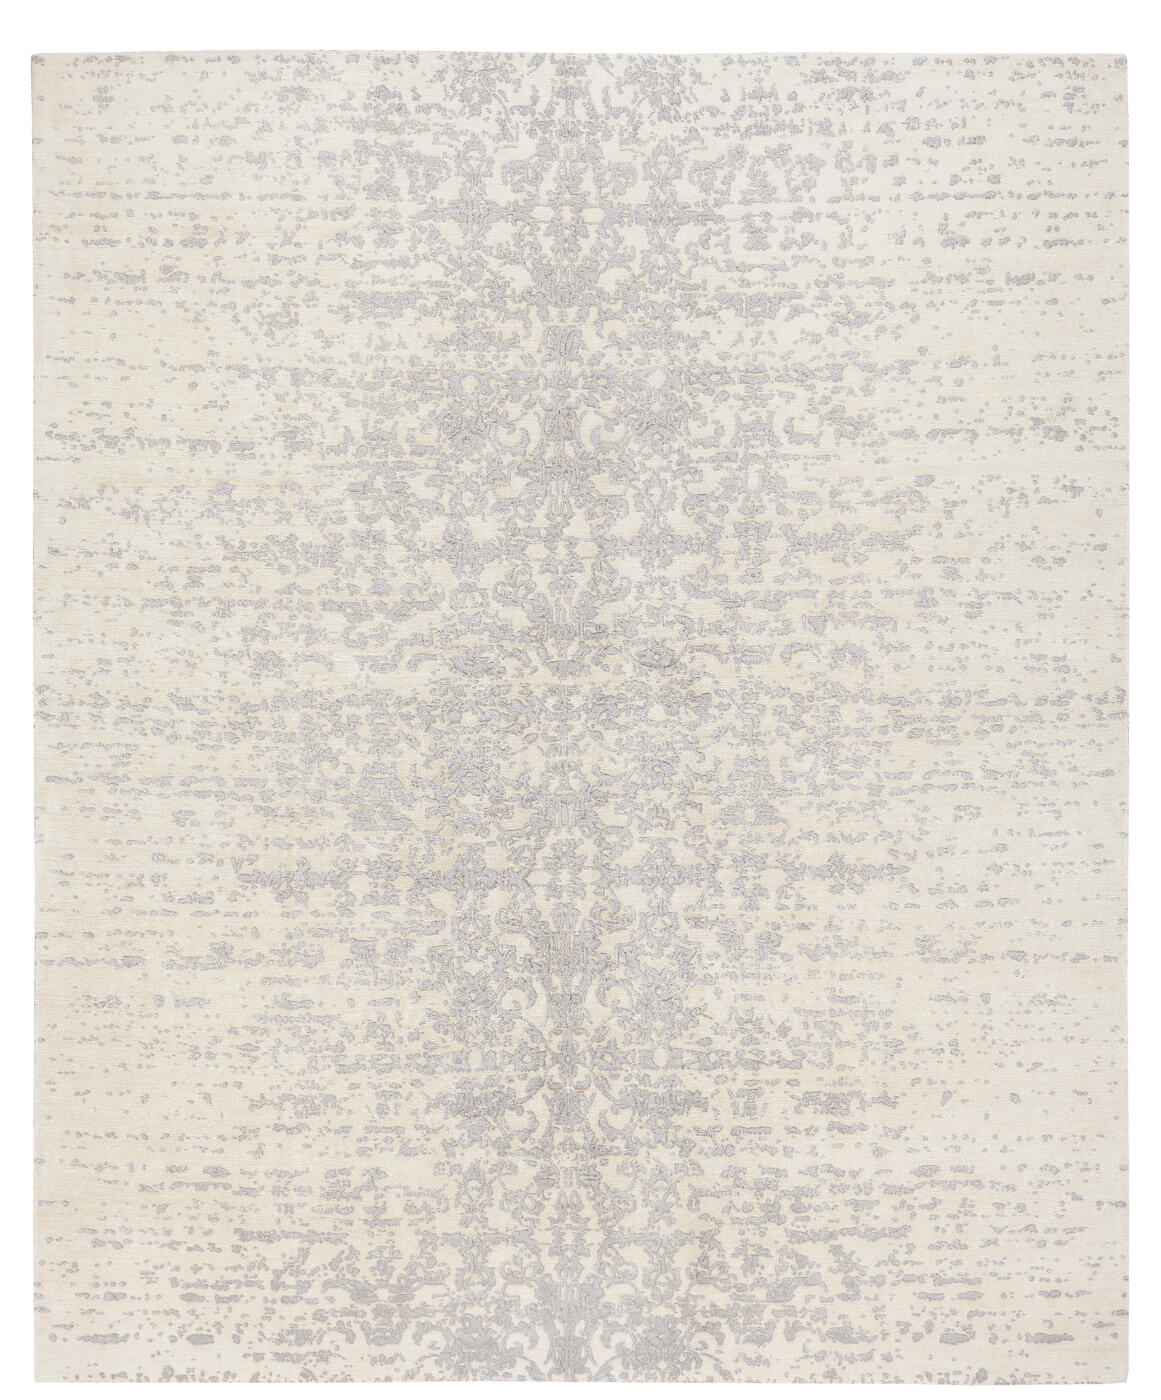 Faded Hand-woven White Luxury Rug